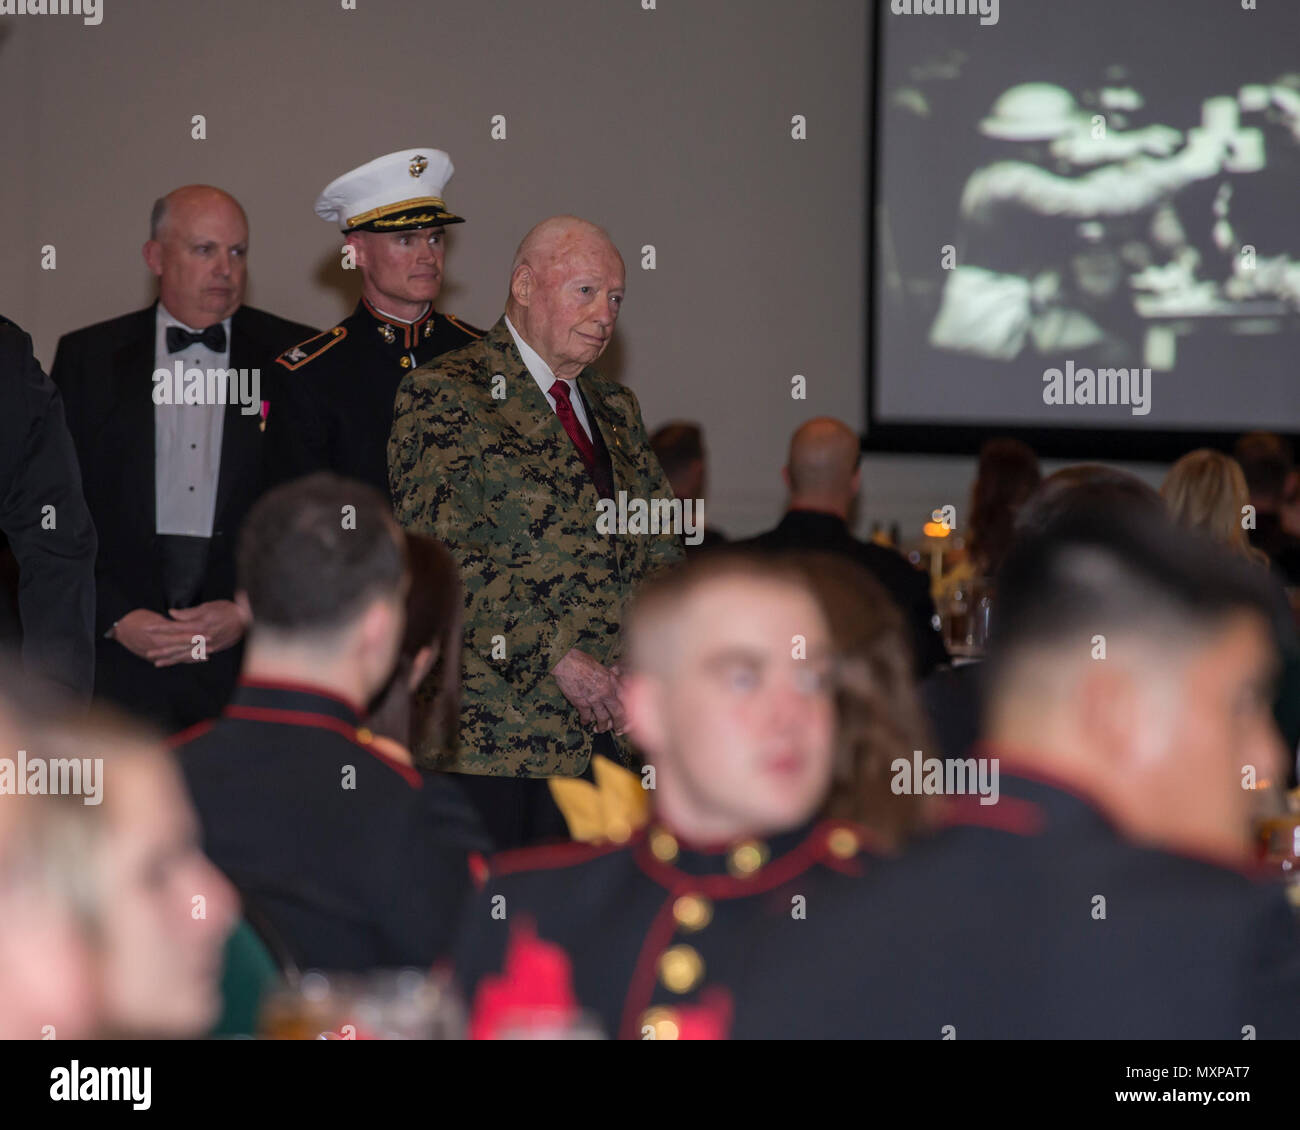 U.S. Marine Corps Gen. Alfred Gray (ret.), 29th Commandant of the Marine Corp, watches the birthday message of the 37th Commandant of the Marine Corp Gen. Robert Neller at Marine Corps Intelligence Activity's 241st Marine Corps birthday ball ceremony at the Fredericksburg Expo and Conference Center in Fredericksburg, Va., Nov. 10, 2016. The Continental Marines were established on this date in 1775, and the United States Marine Corps celebrates every year with a traditional birthday ball and cake-cutting ceremony. (U.S. Marine Corps photo by Cpl. Jacqueline A. Garcia) Stock Photo